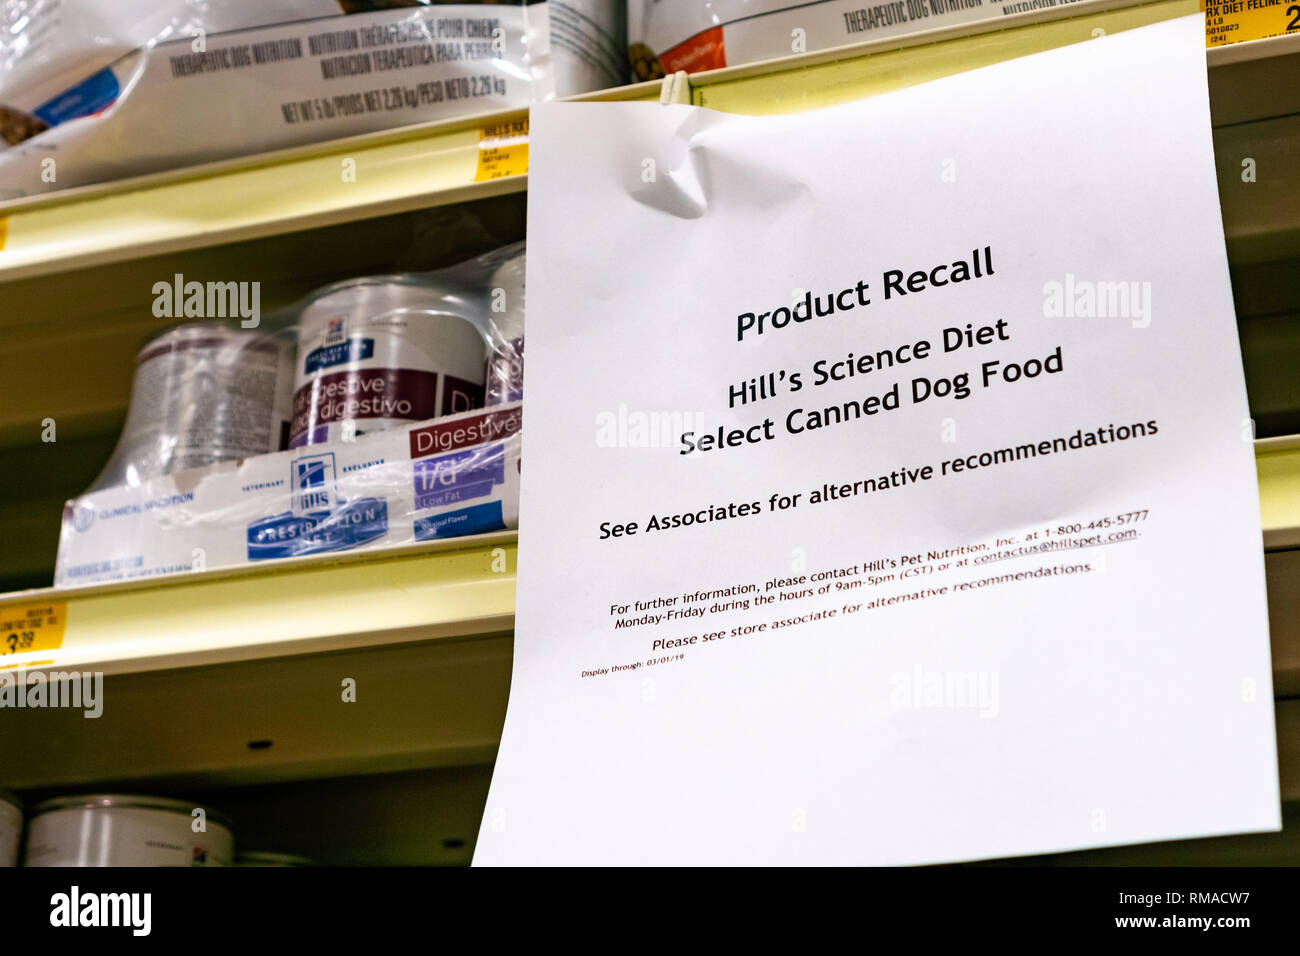 February 13, 2019 Sunnyvale / CA / USA - Hill's Science Diet Select Canned Dog Food Product Recall sign displayed in Pet Store Stock Photo